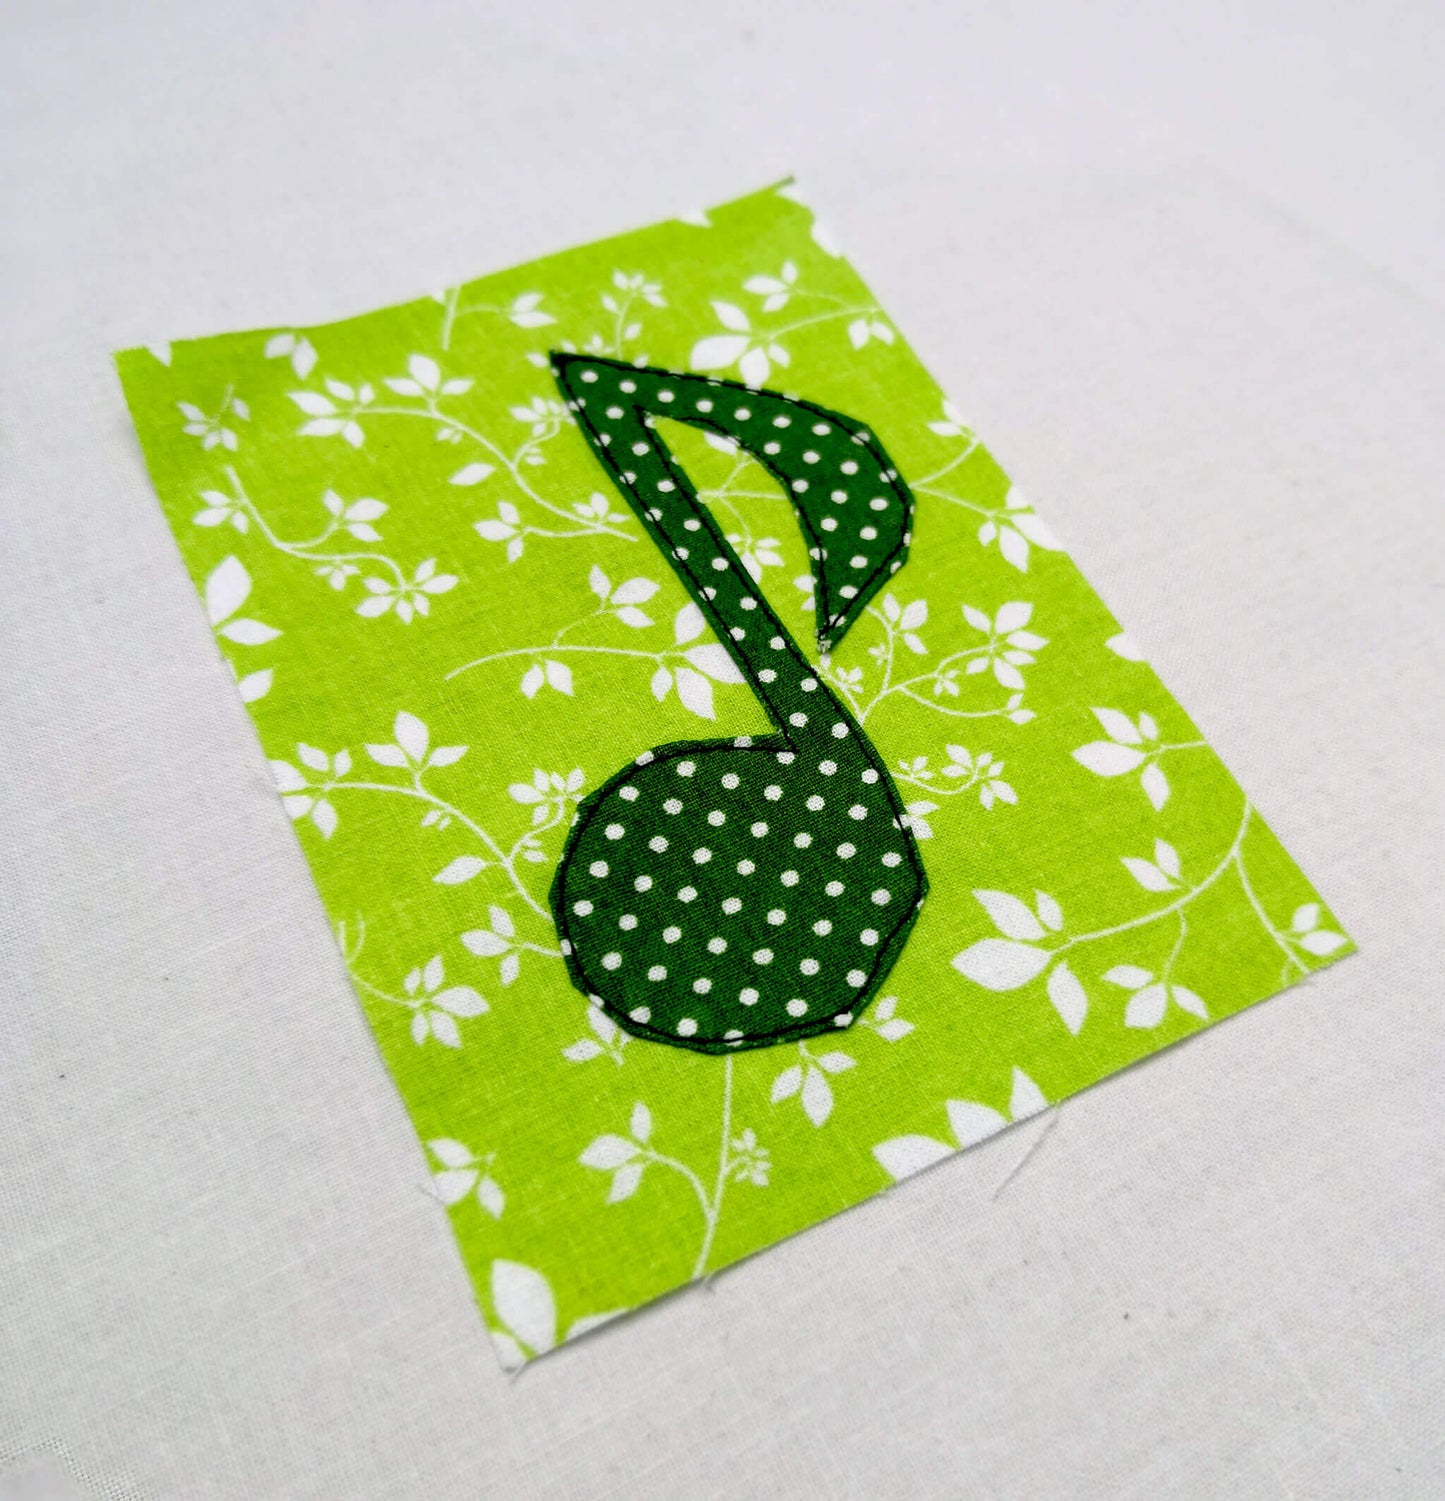 Music note applique on fabric